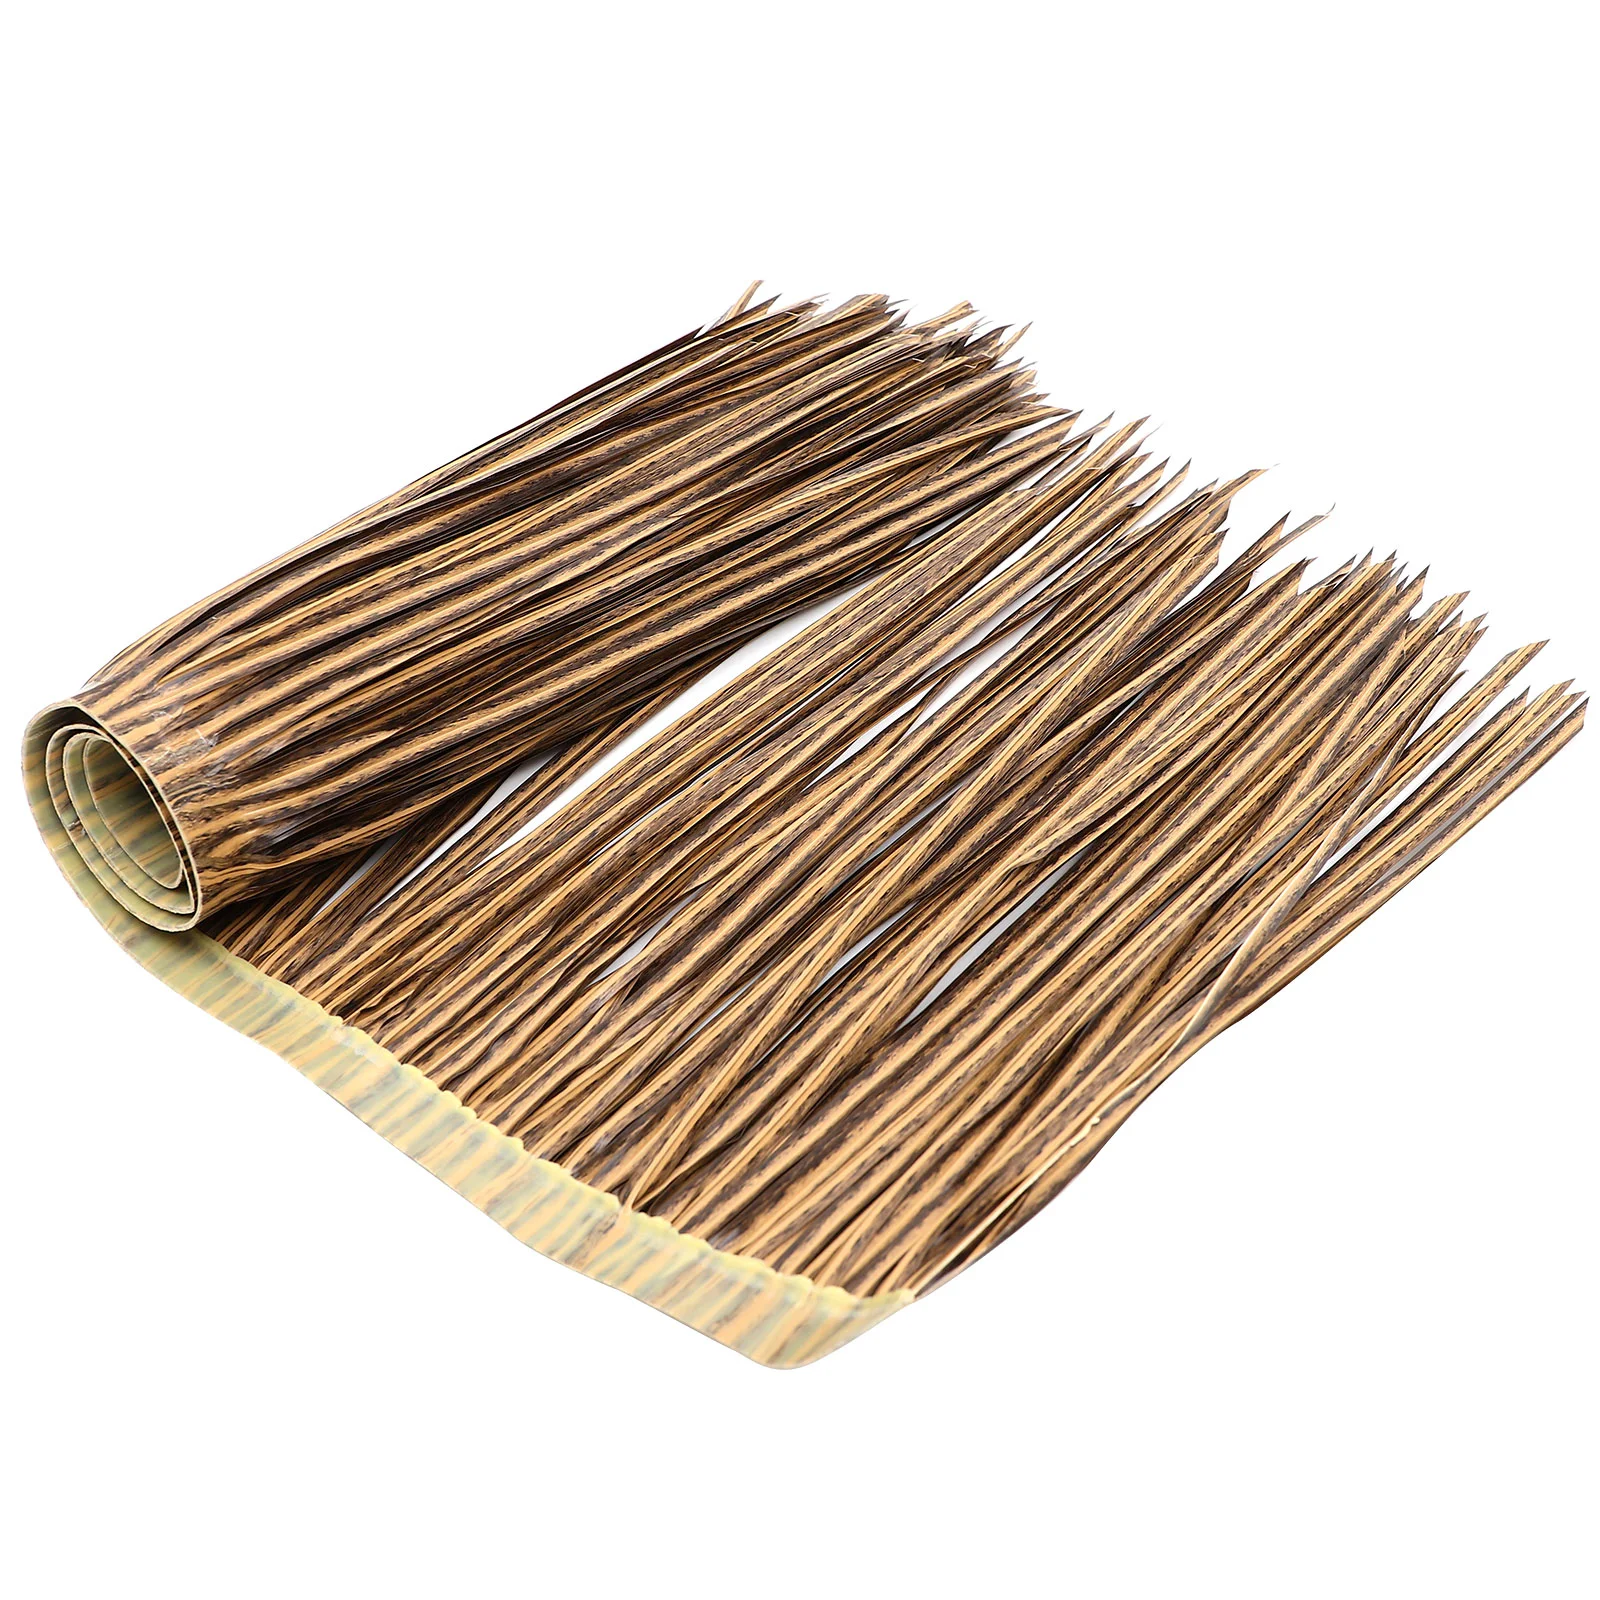 

DIY Mexican Straw Roof Simulation Thatch Garden Plastic Cover Roofing Willow Fence Screening Landscaping Decor